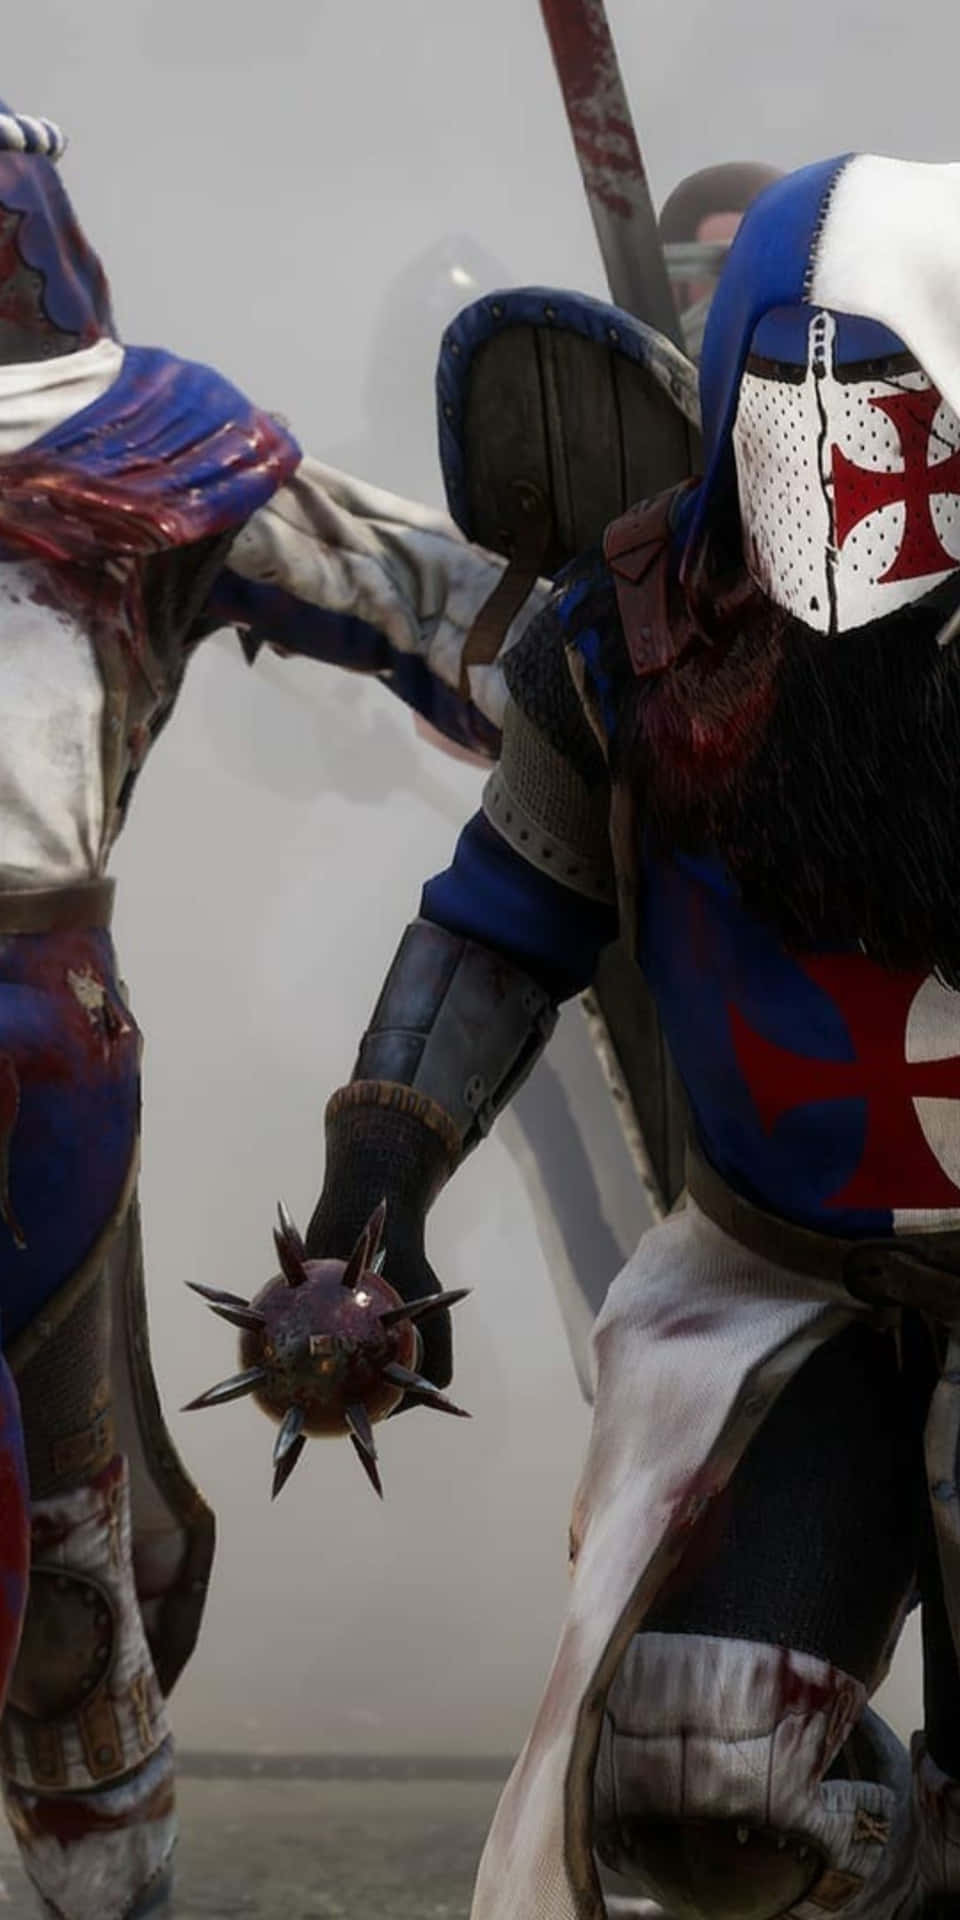 Computers Around the World are Raving About Pixel 3’s Mordhau